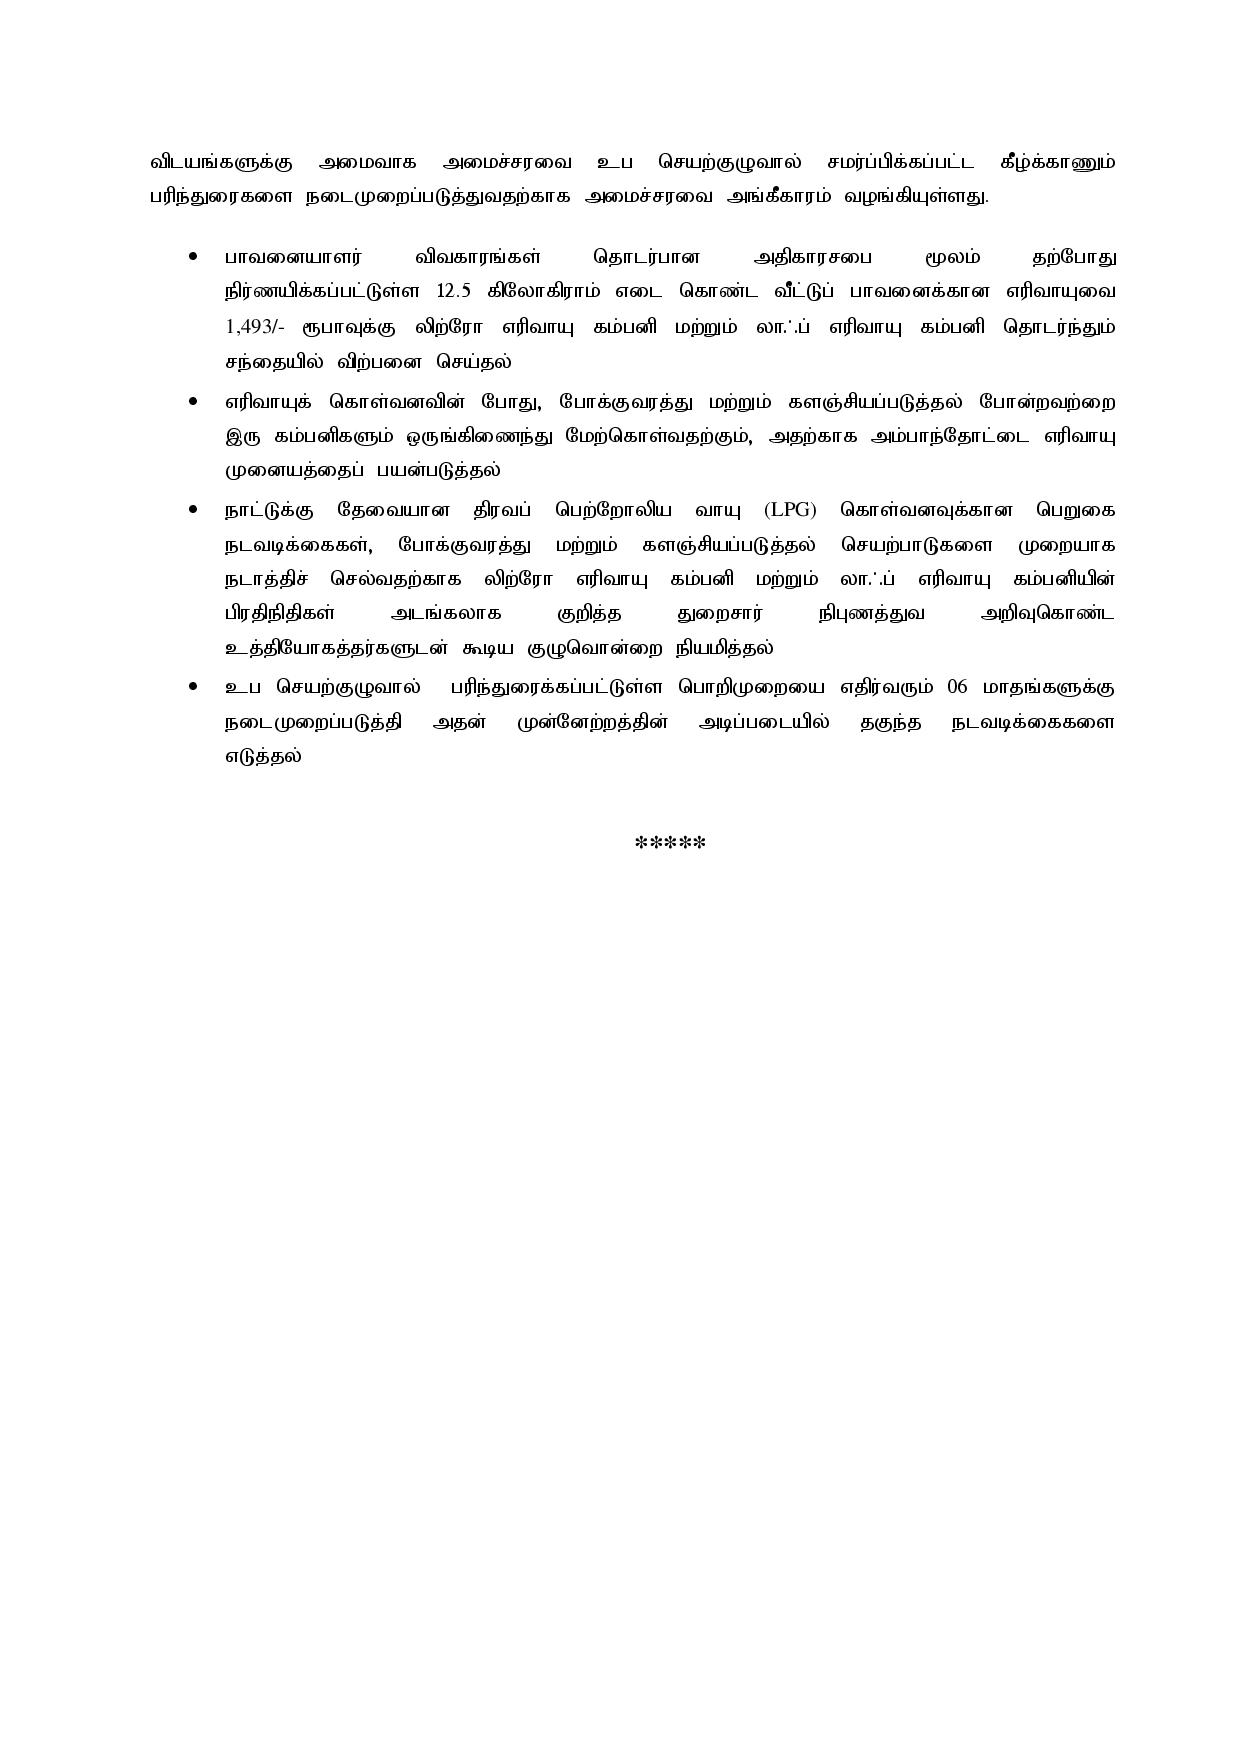 Cabinet Decisions on 21.06.2021 Tamil page 004